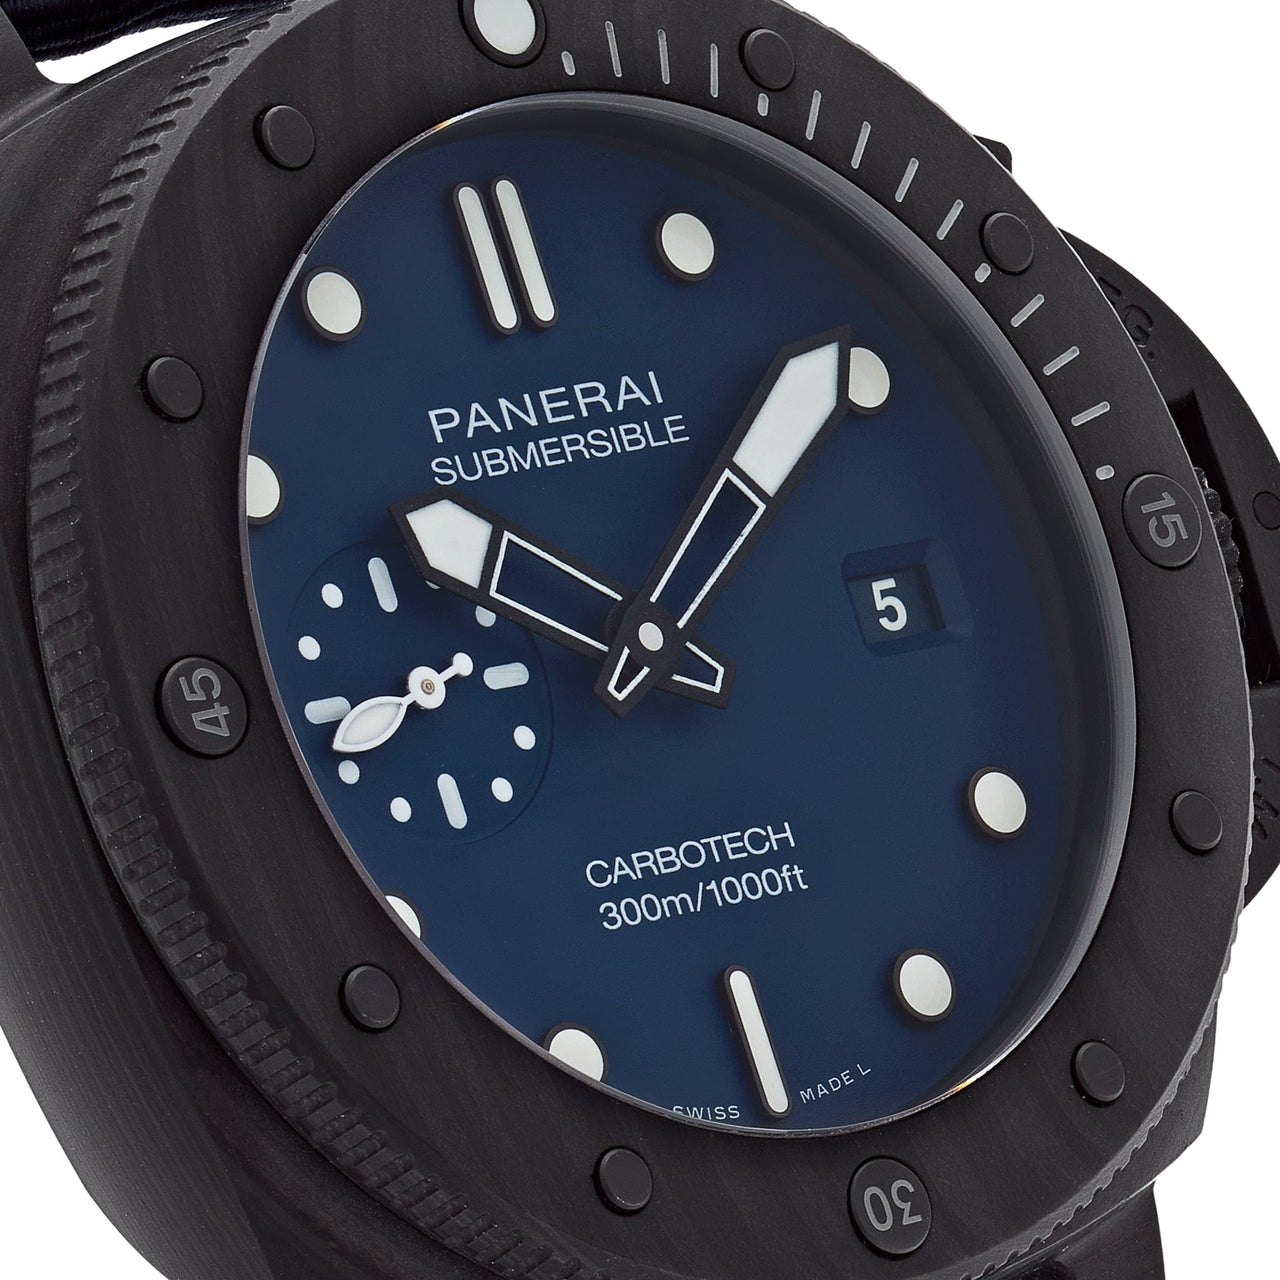 Watch Luminor Submersible 1950 Carbotech™ | Panerai PAM00616 Carbotech -  Rubber Strap